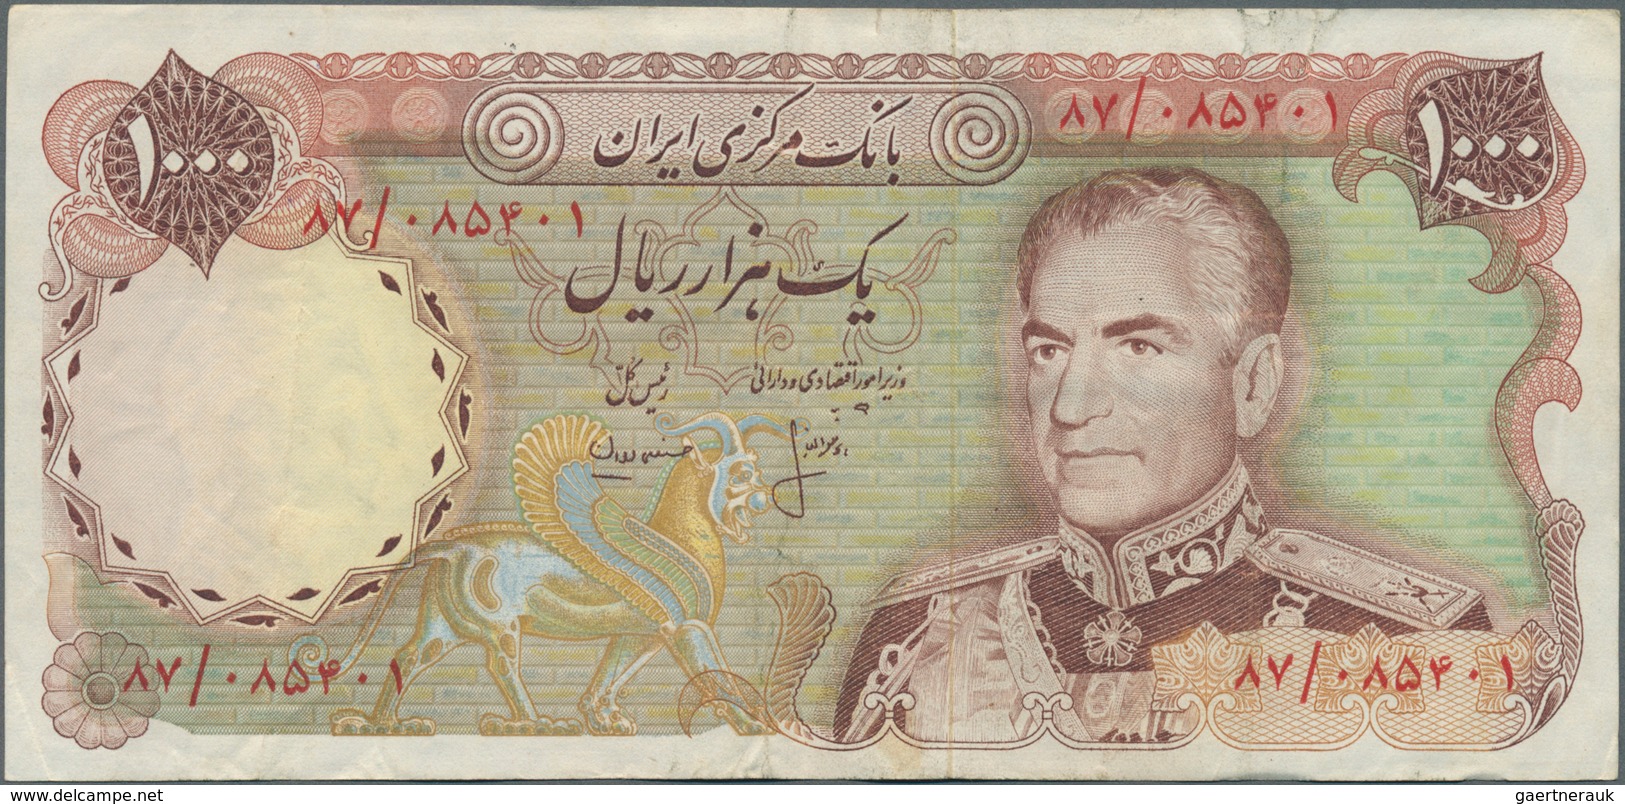 02790 Iran: Bundle Of 86 Pcs 1000 Rials ND P. 105b, All Used In Condition From F- To VF. (86 Pcs) - Irán